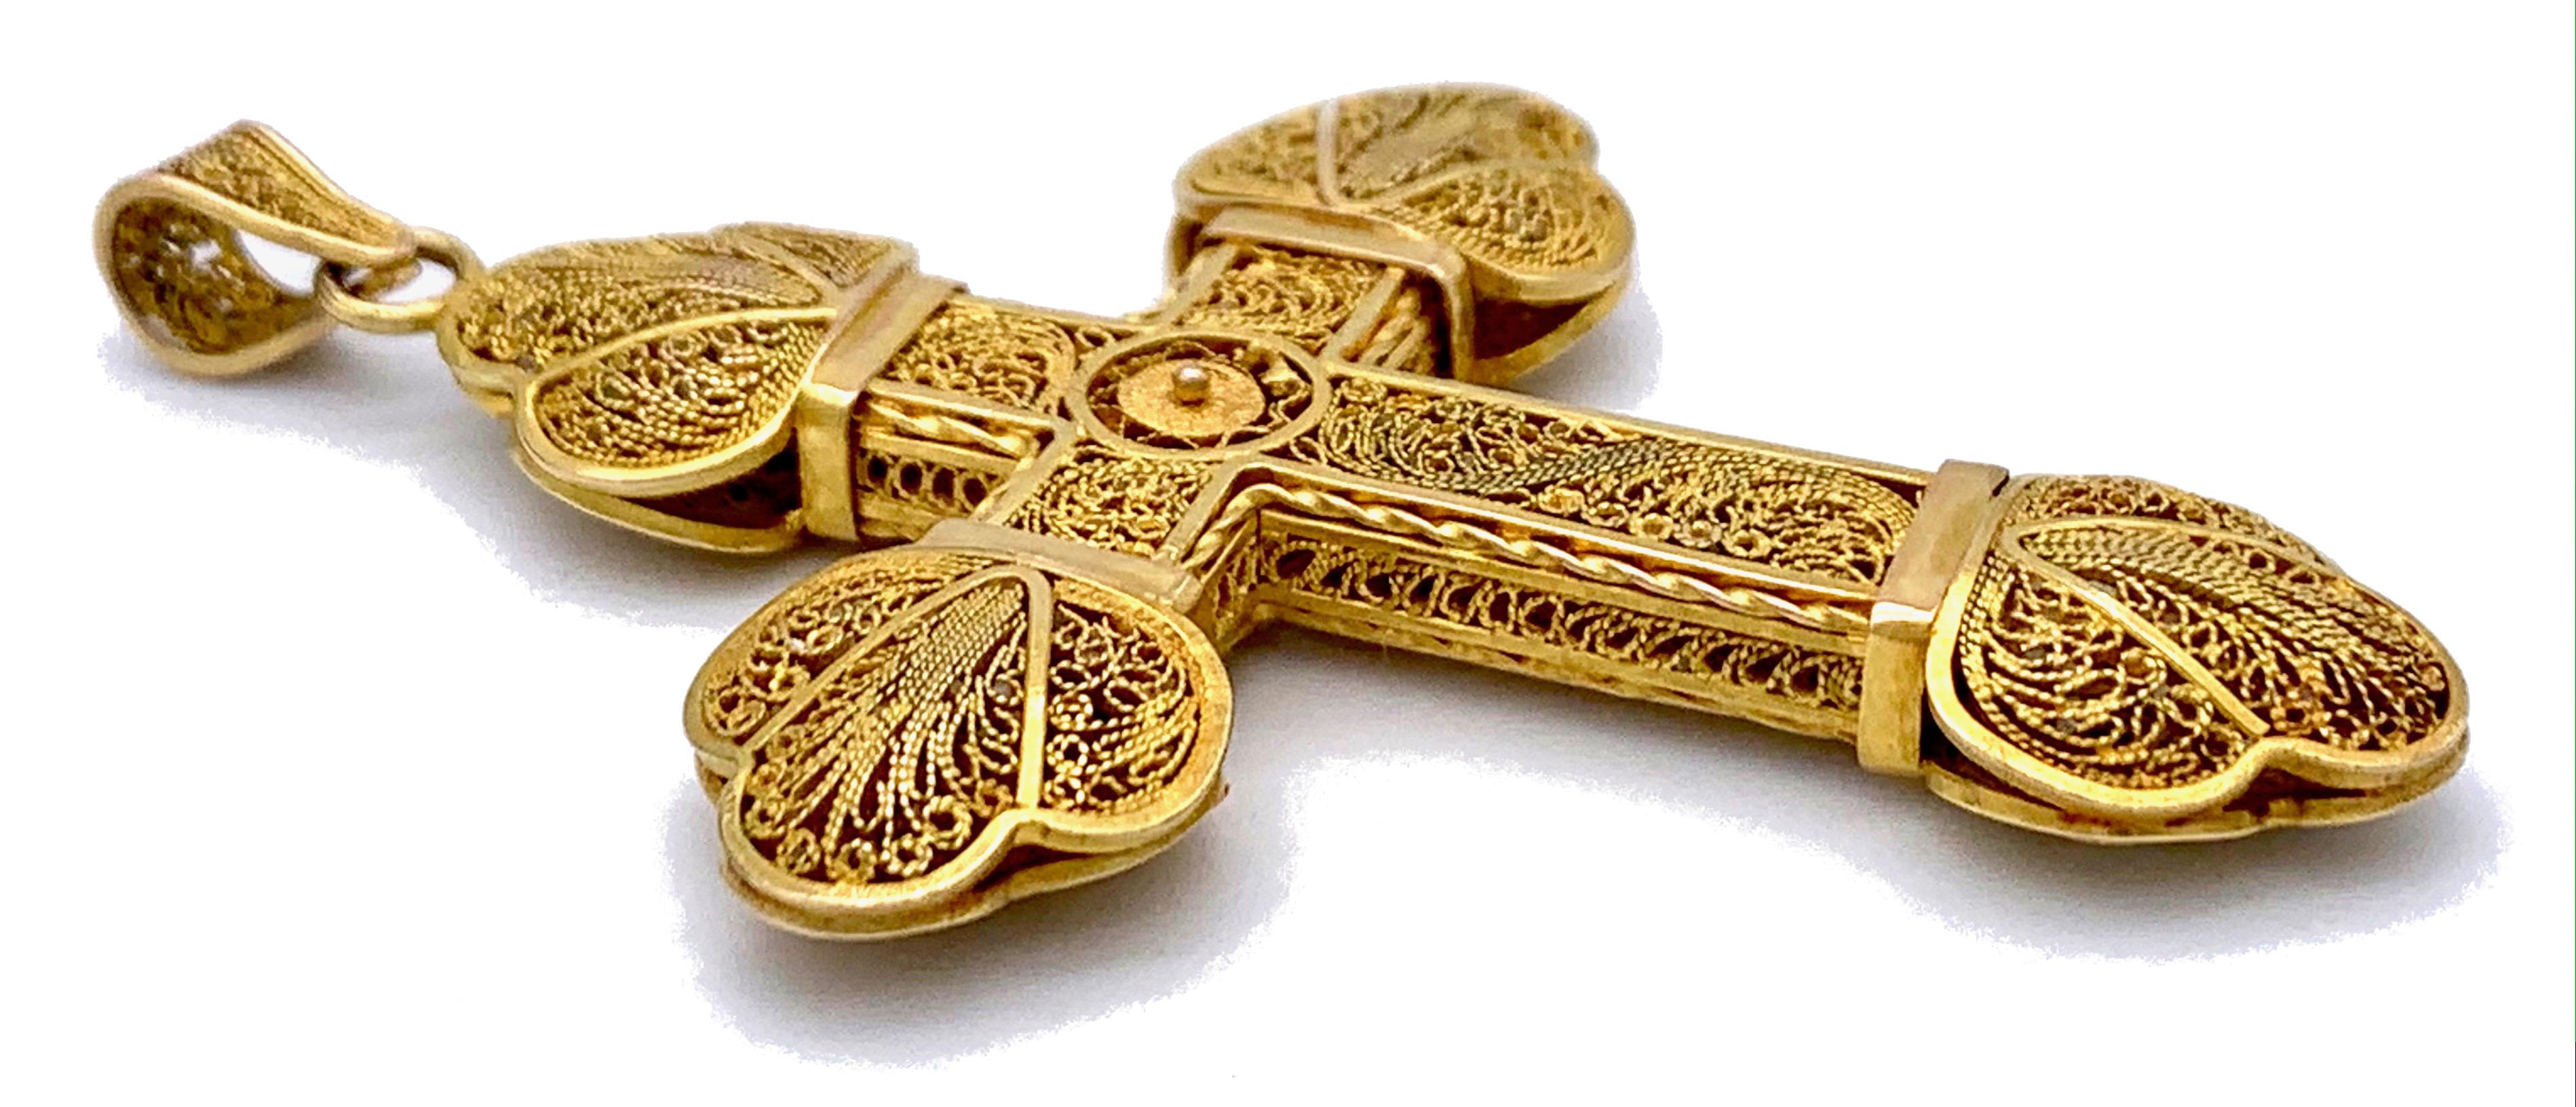 This wonderful and completely smooth double sided cross pendant has been made out of fine gold wire in Genova in the middle of the nineteenth century.
It is a typical example of gold filigree work from Genua. It has been loved so much that it's